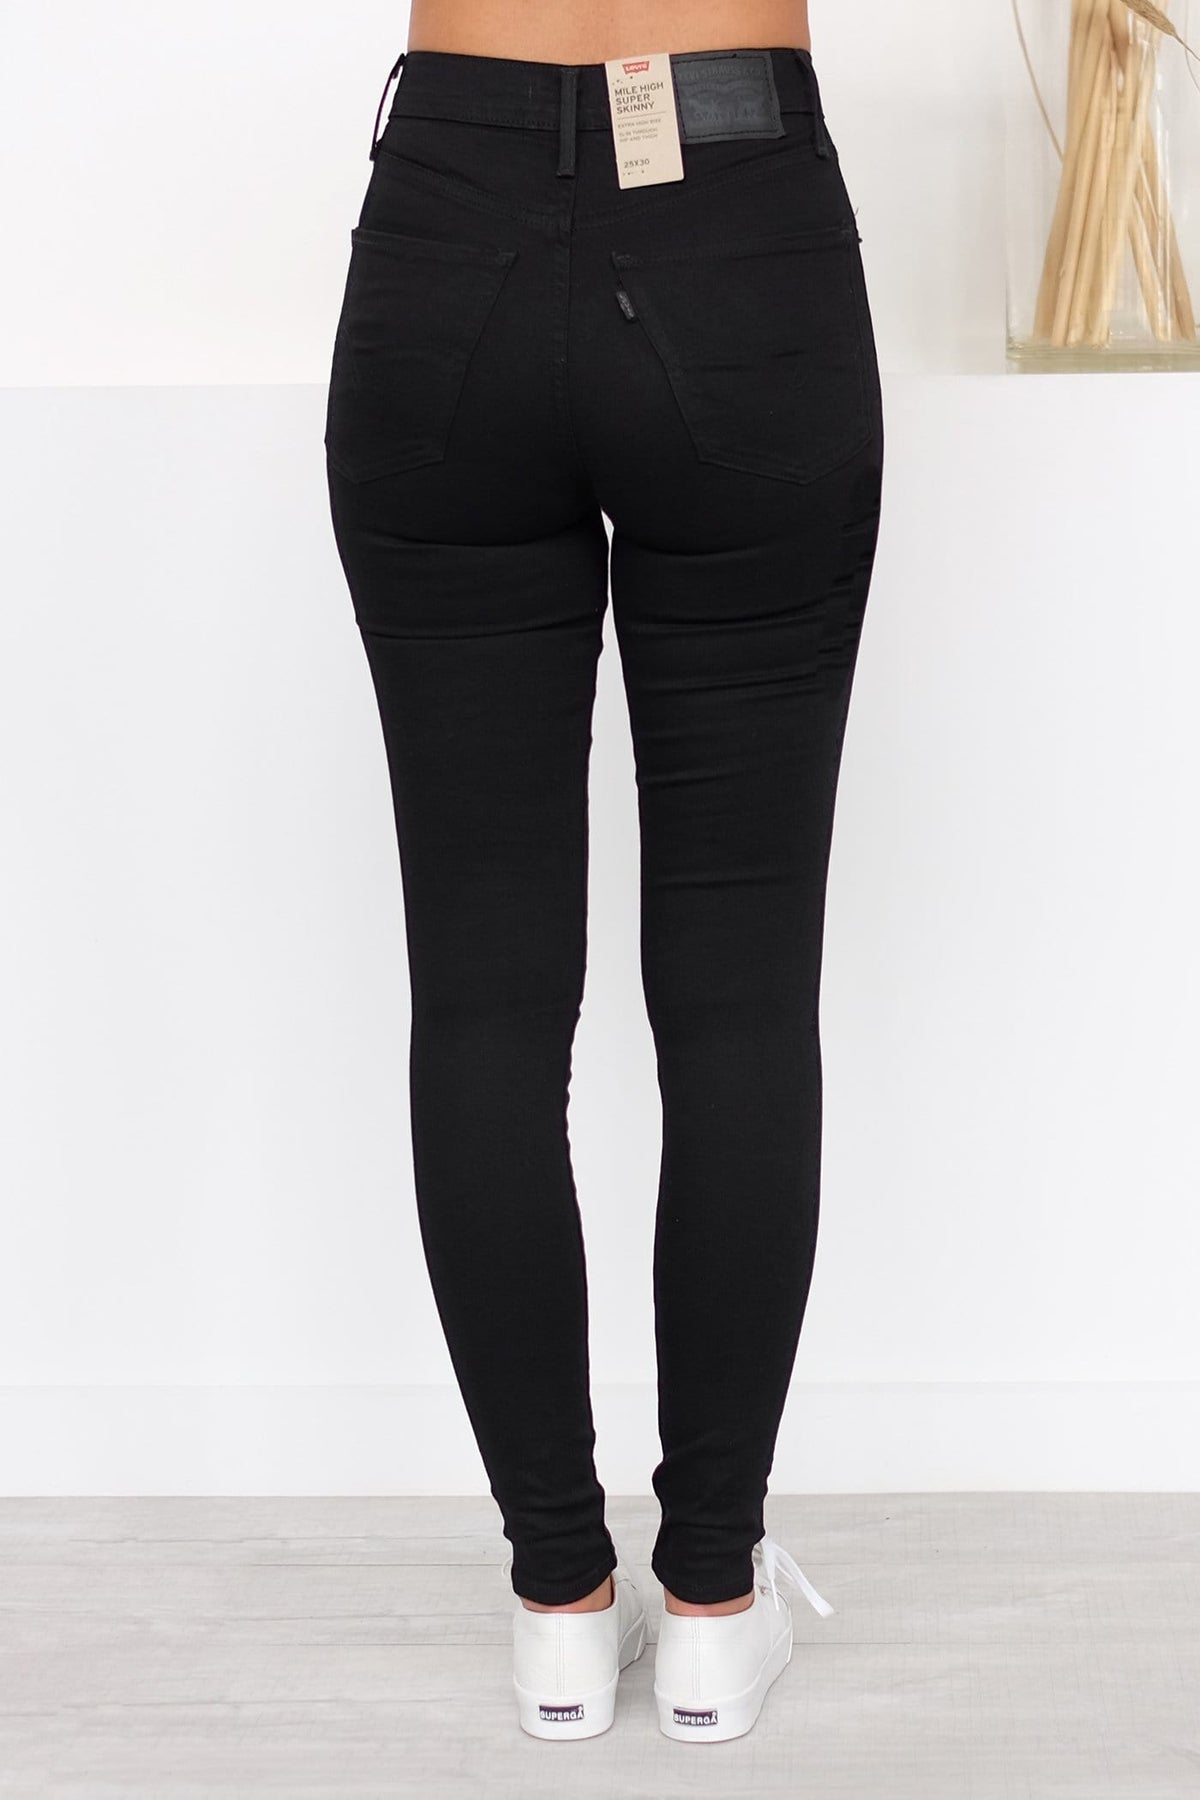 Women's Mile High Jeans